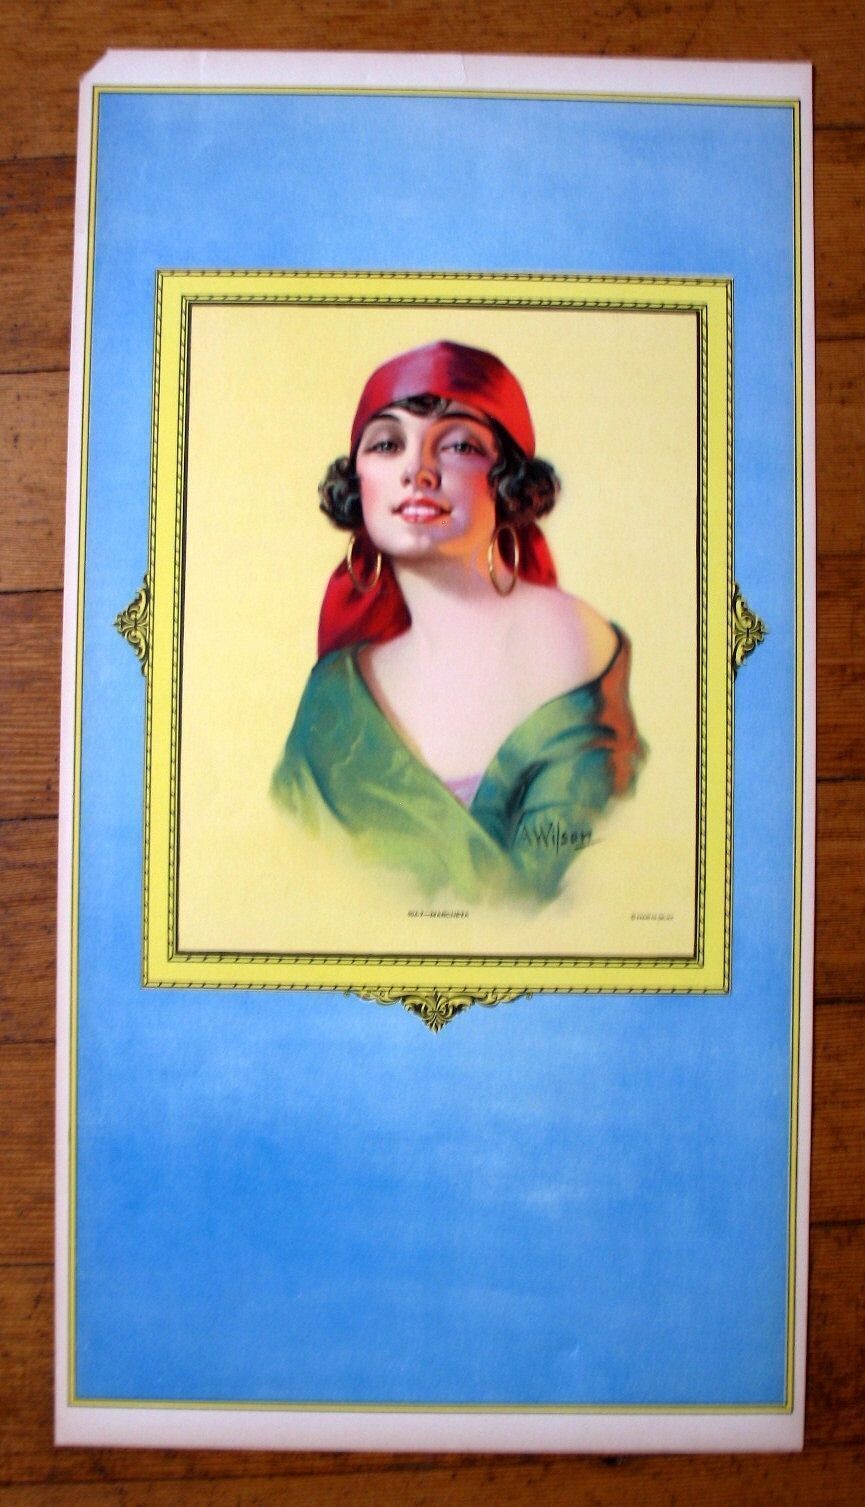 1930s Deco Style Pinup Girl Picture Woman Turban Head Wrap by Wilson Marcheta